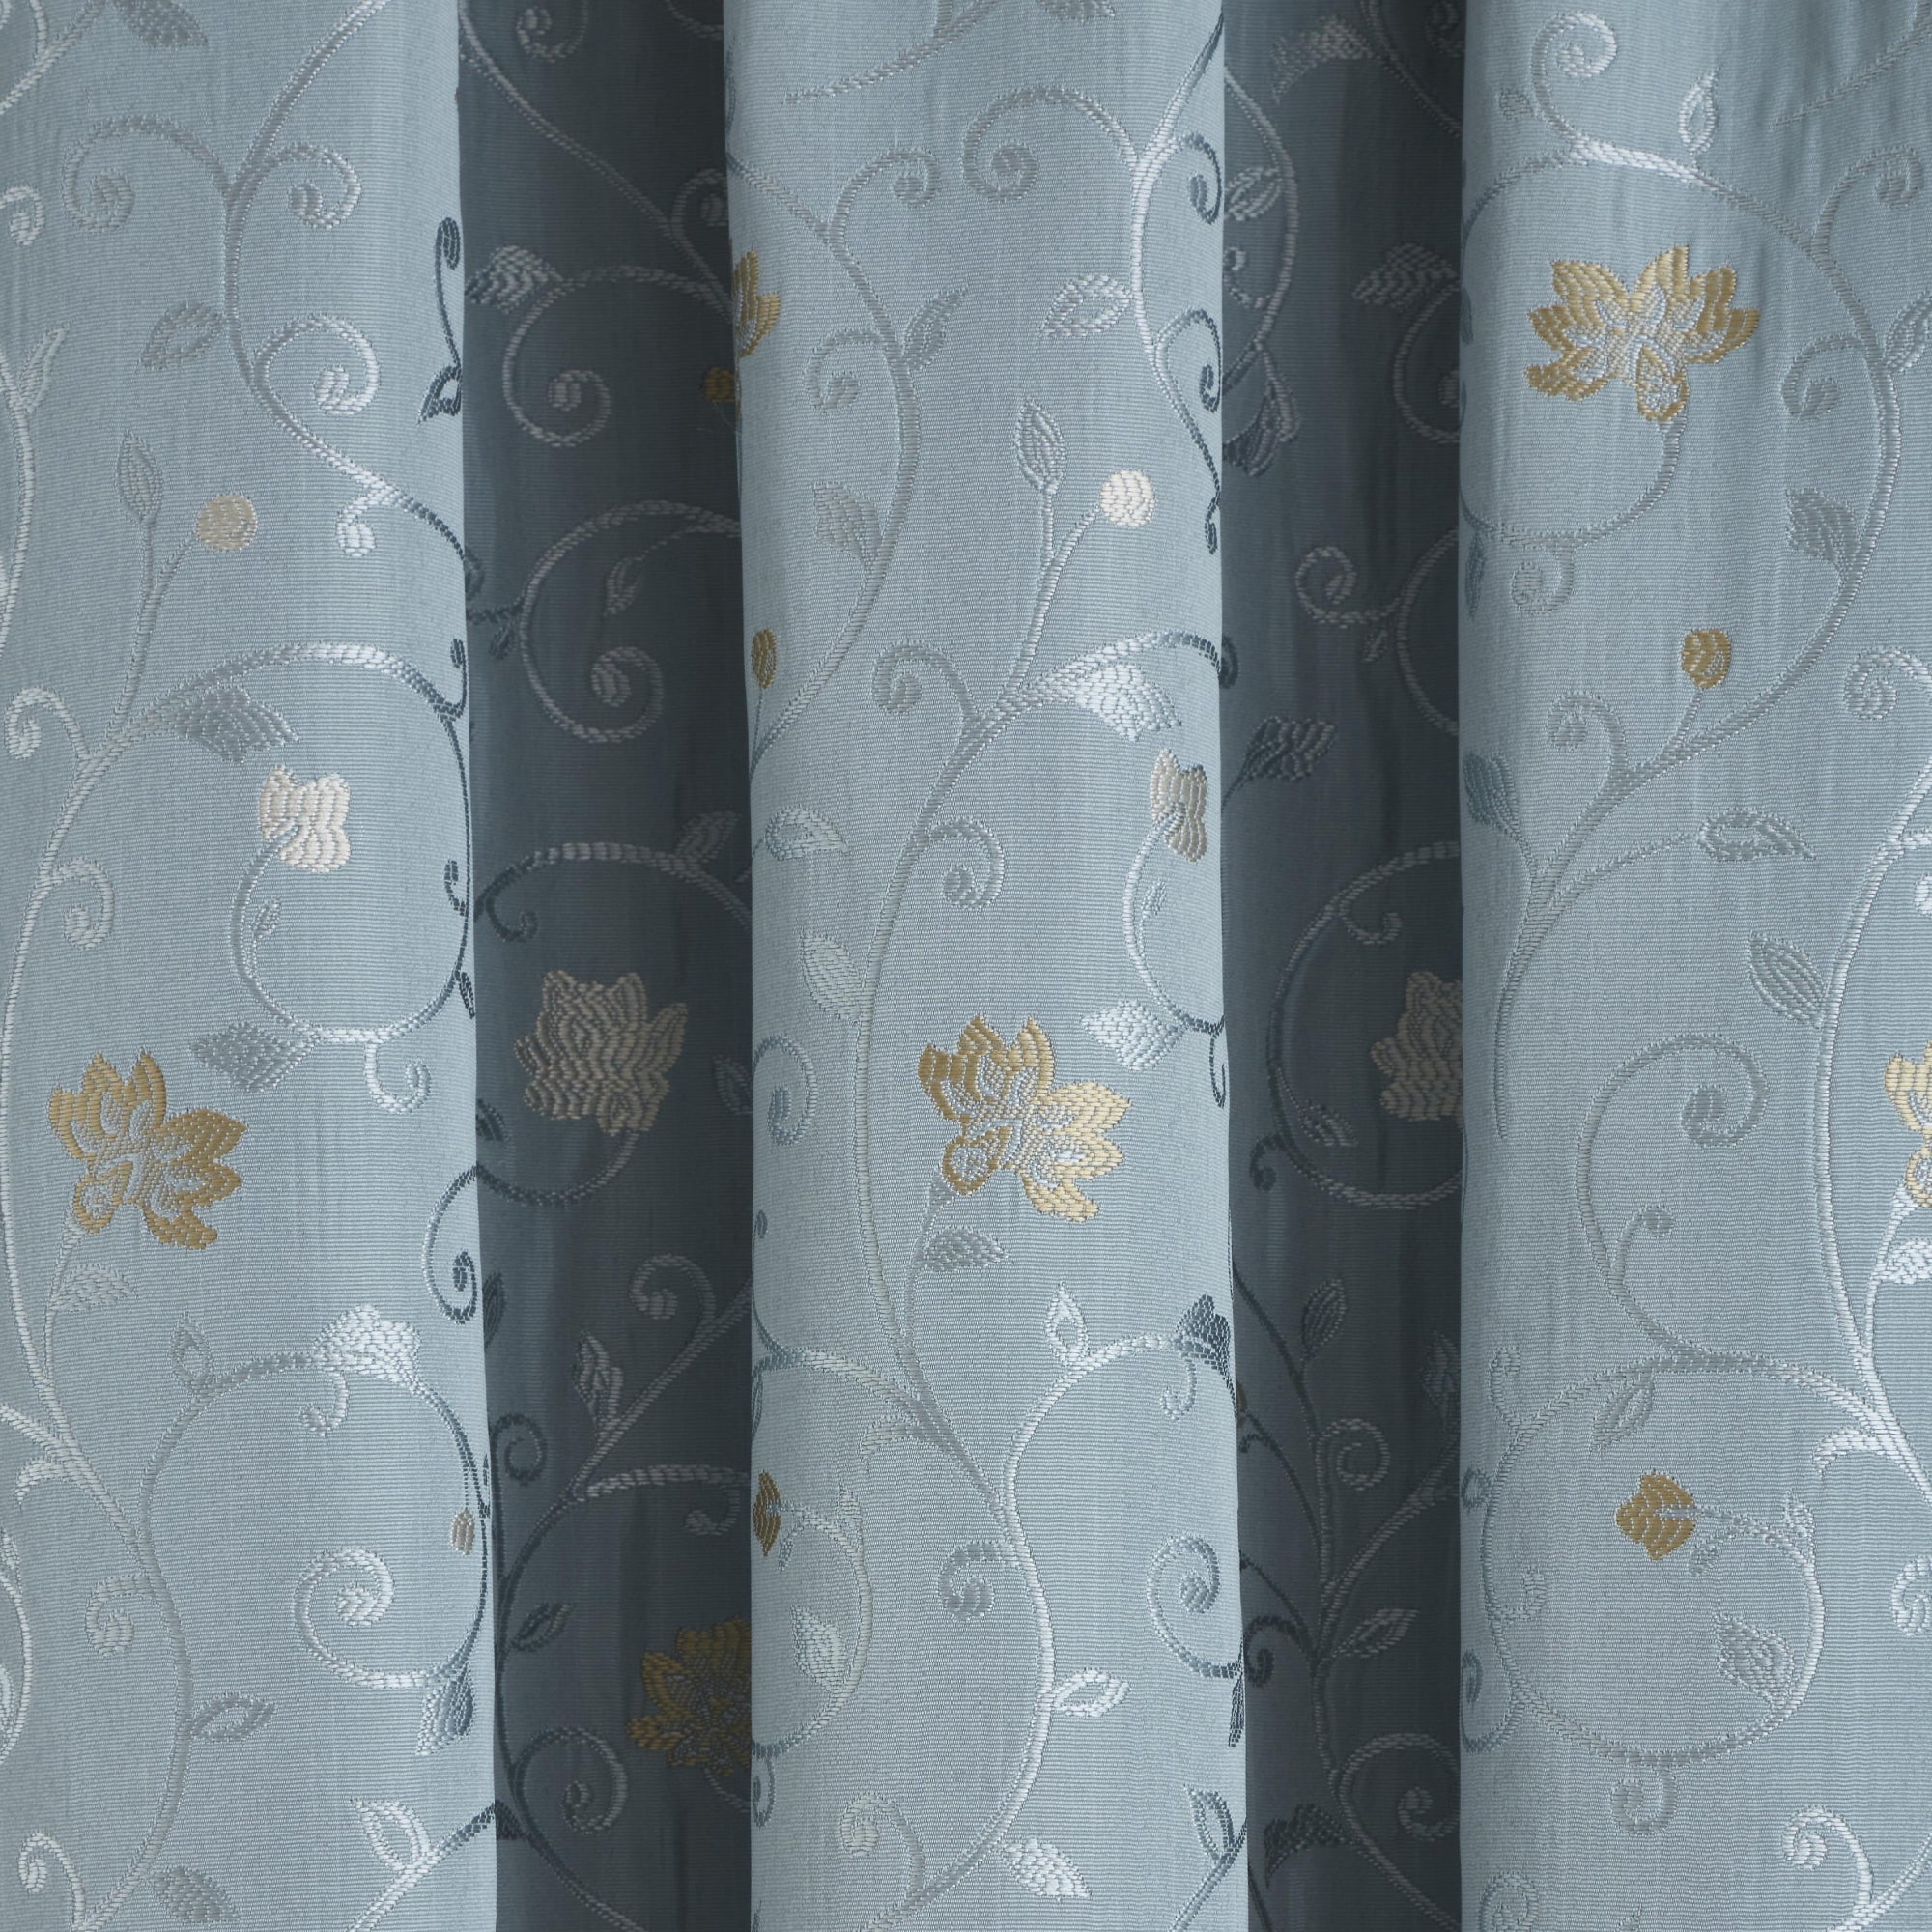 Pair of Pencil Pleat Curtains Renata by Curtina in Duckegg